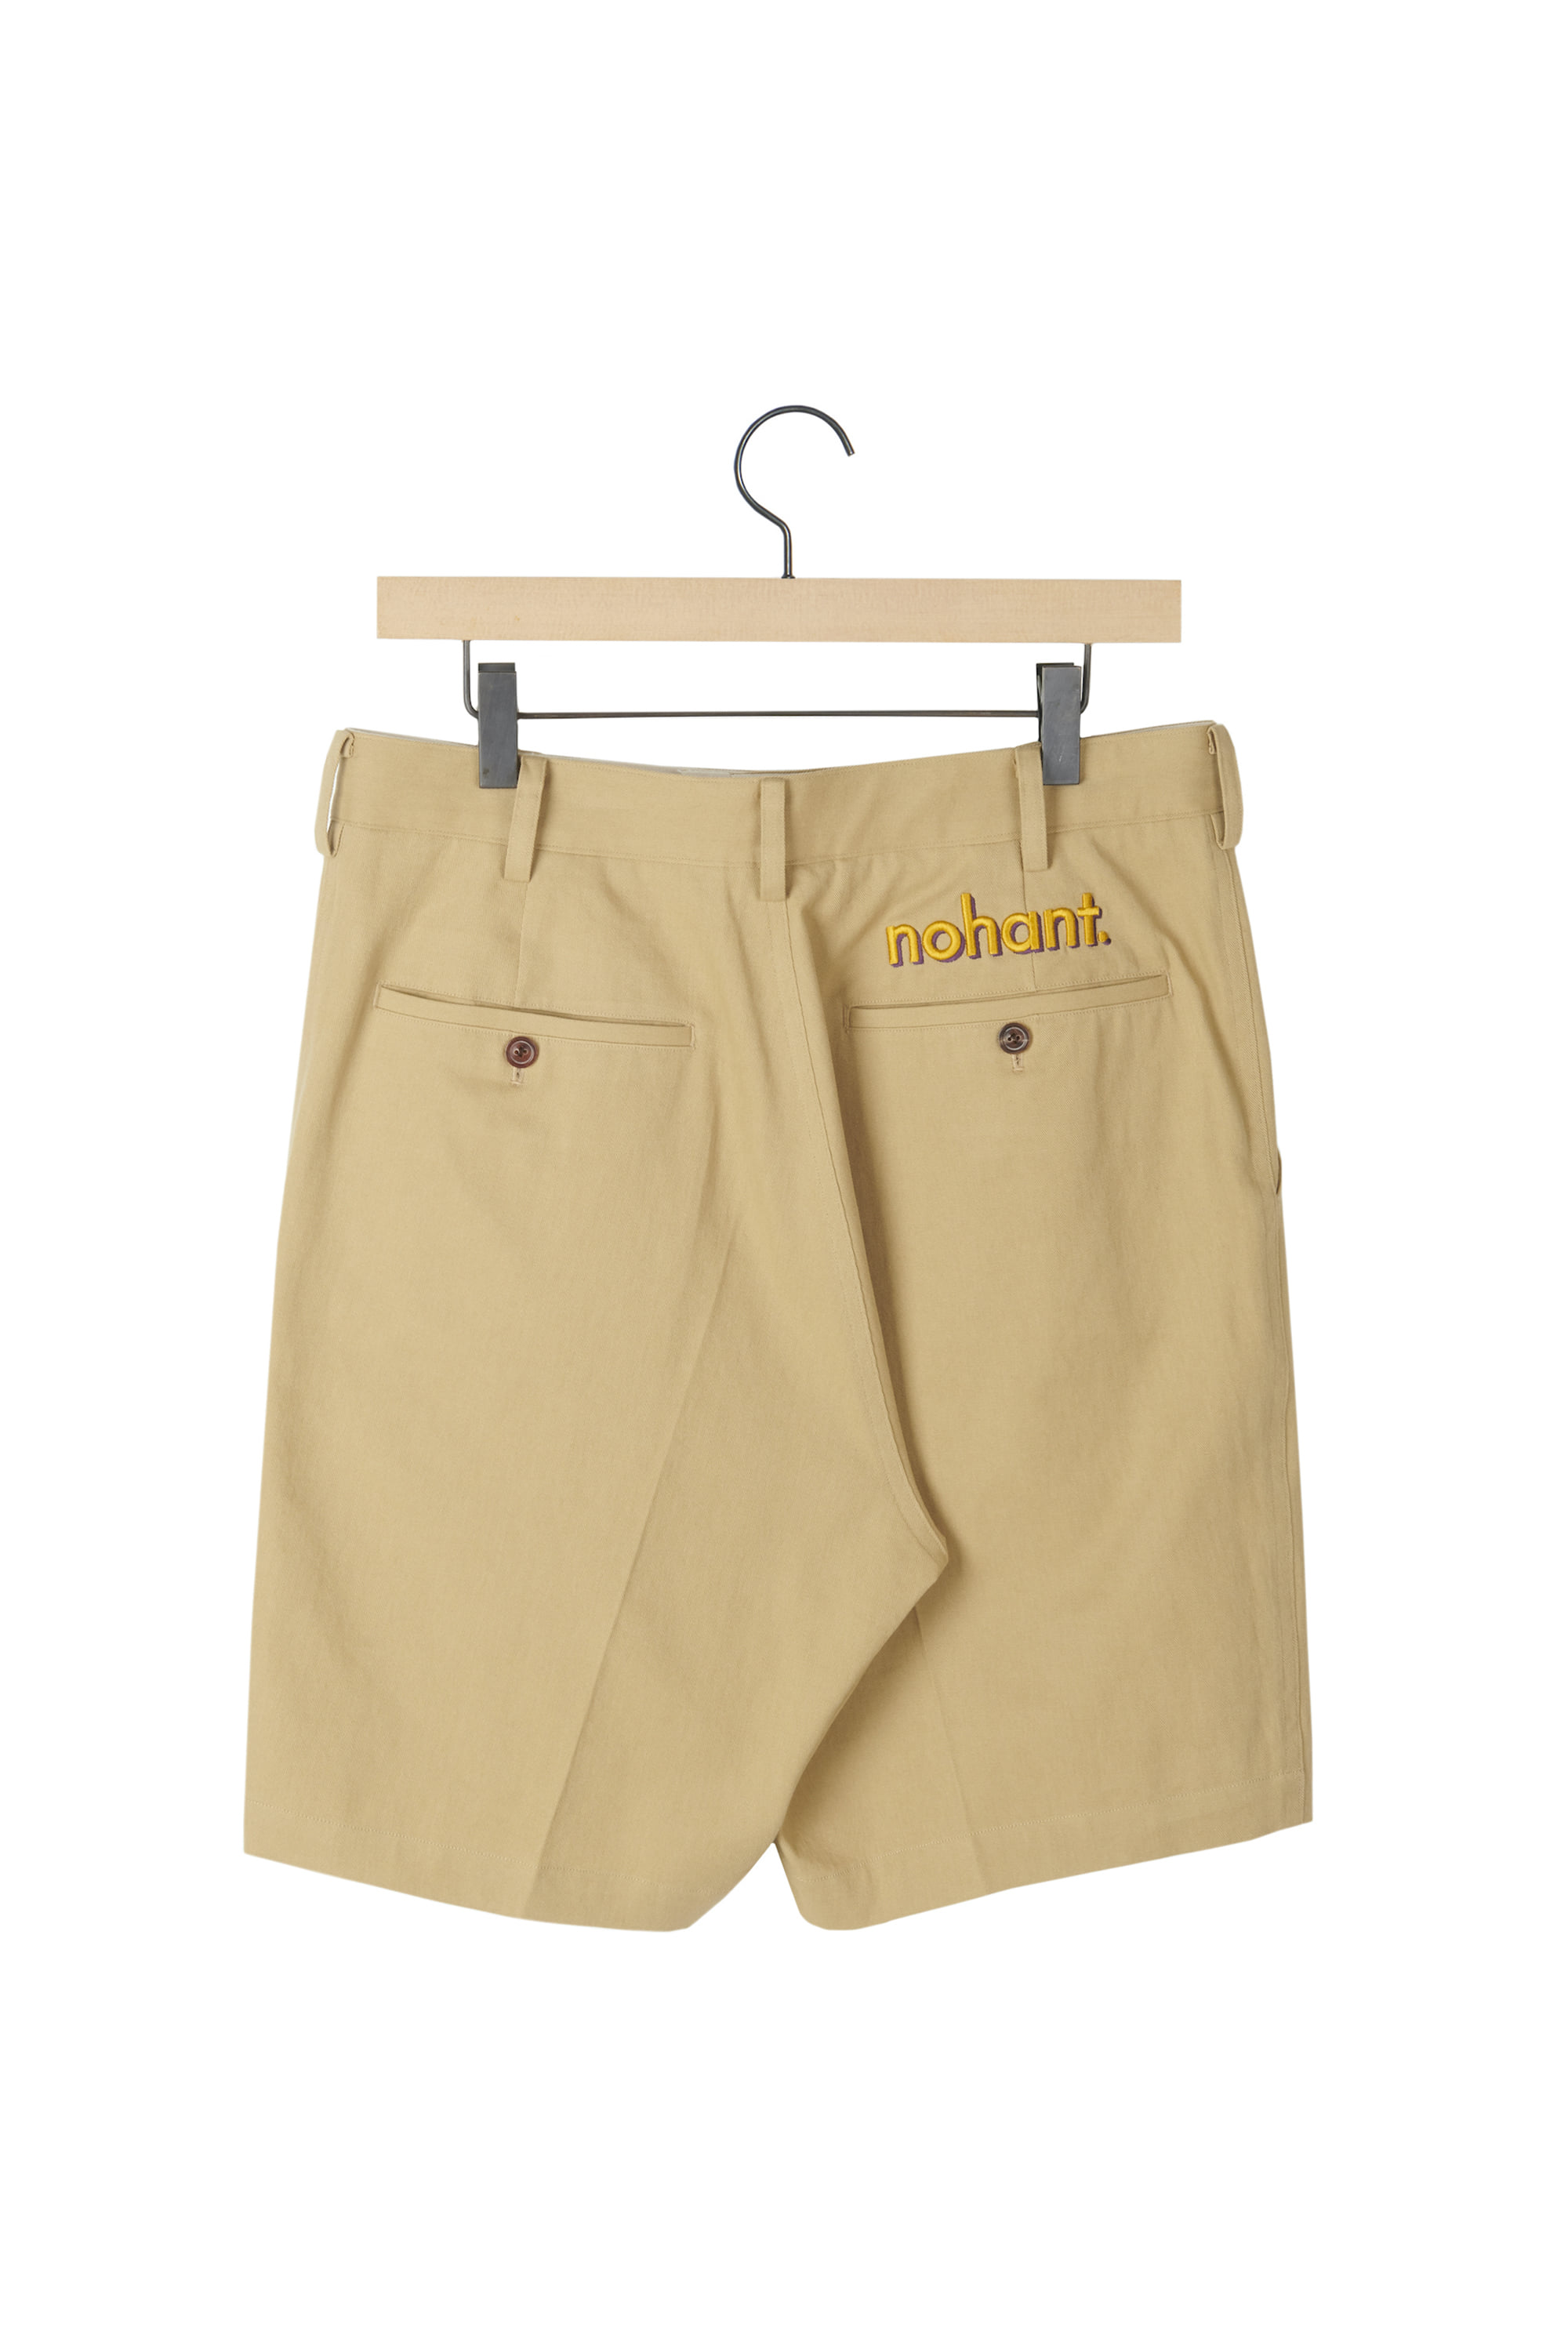 [CARRY OVER] LOGO CHINO SHORTS BEIGE